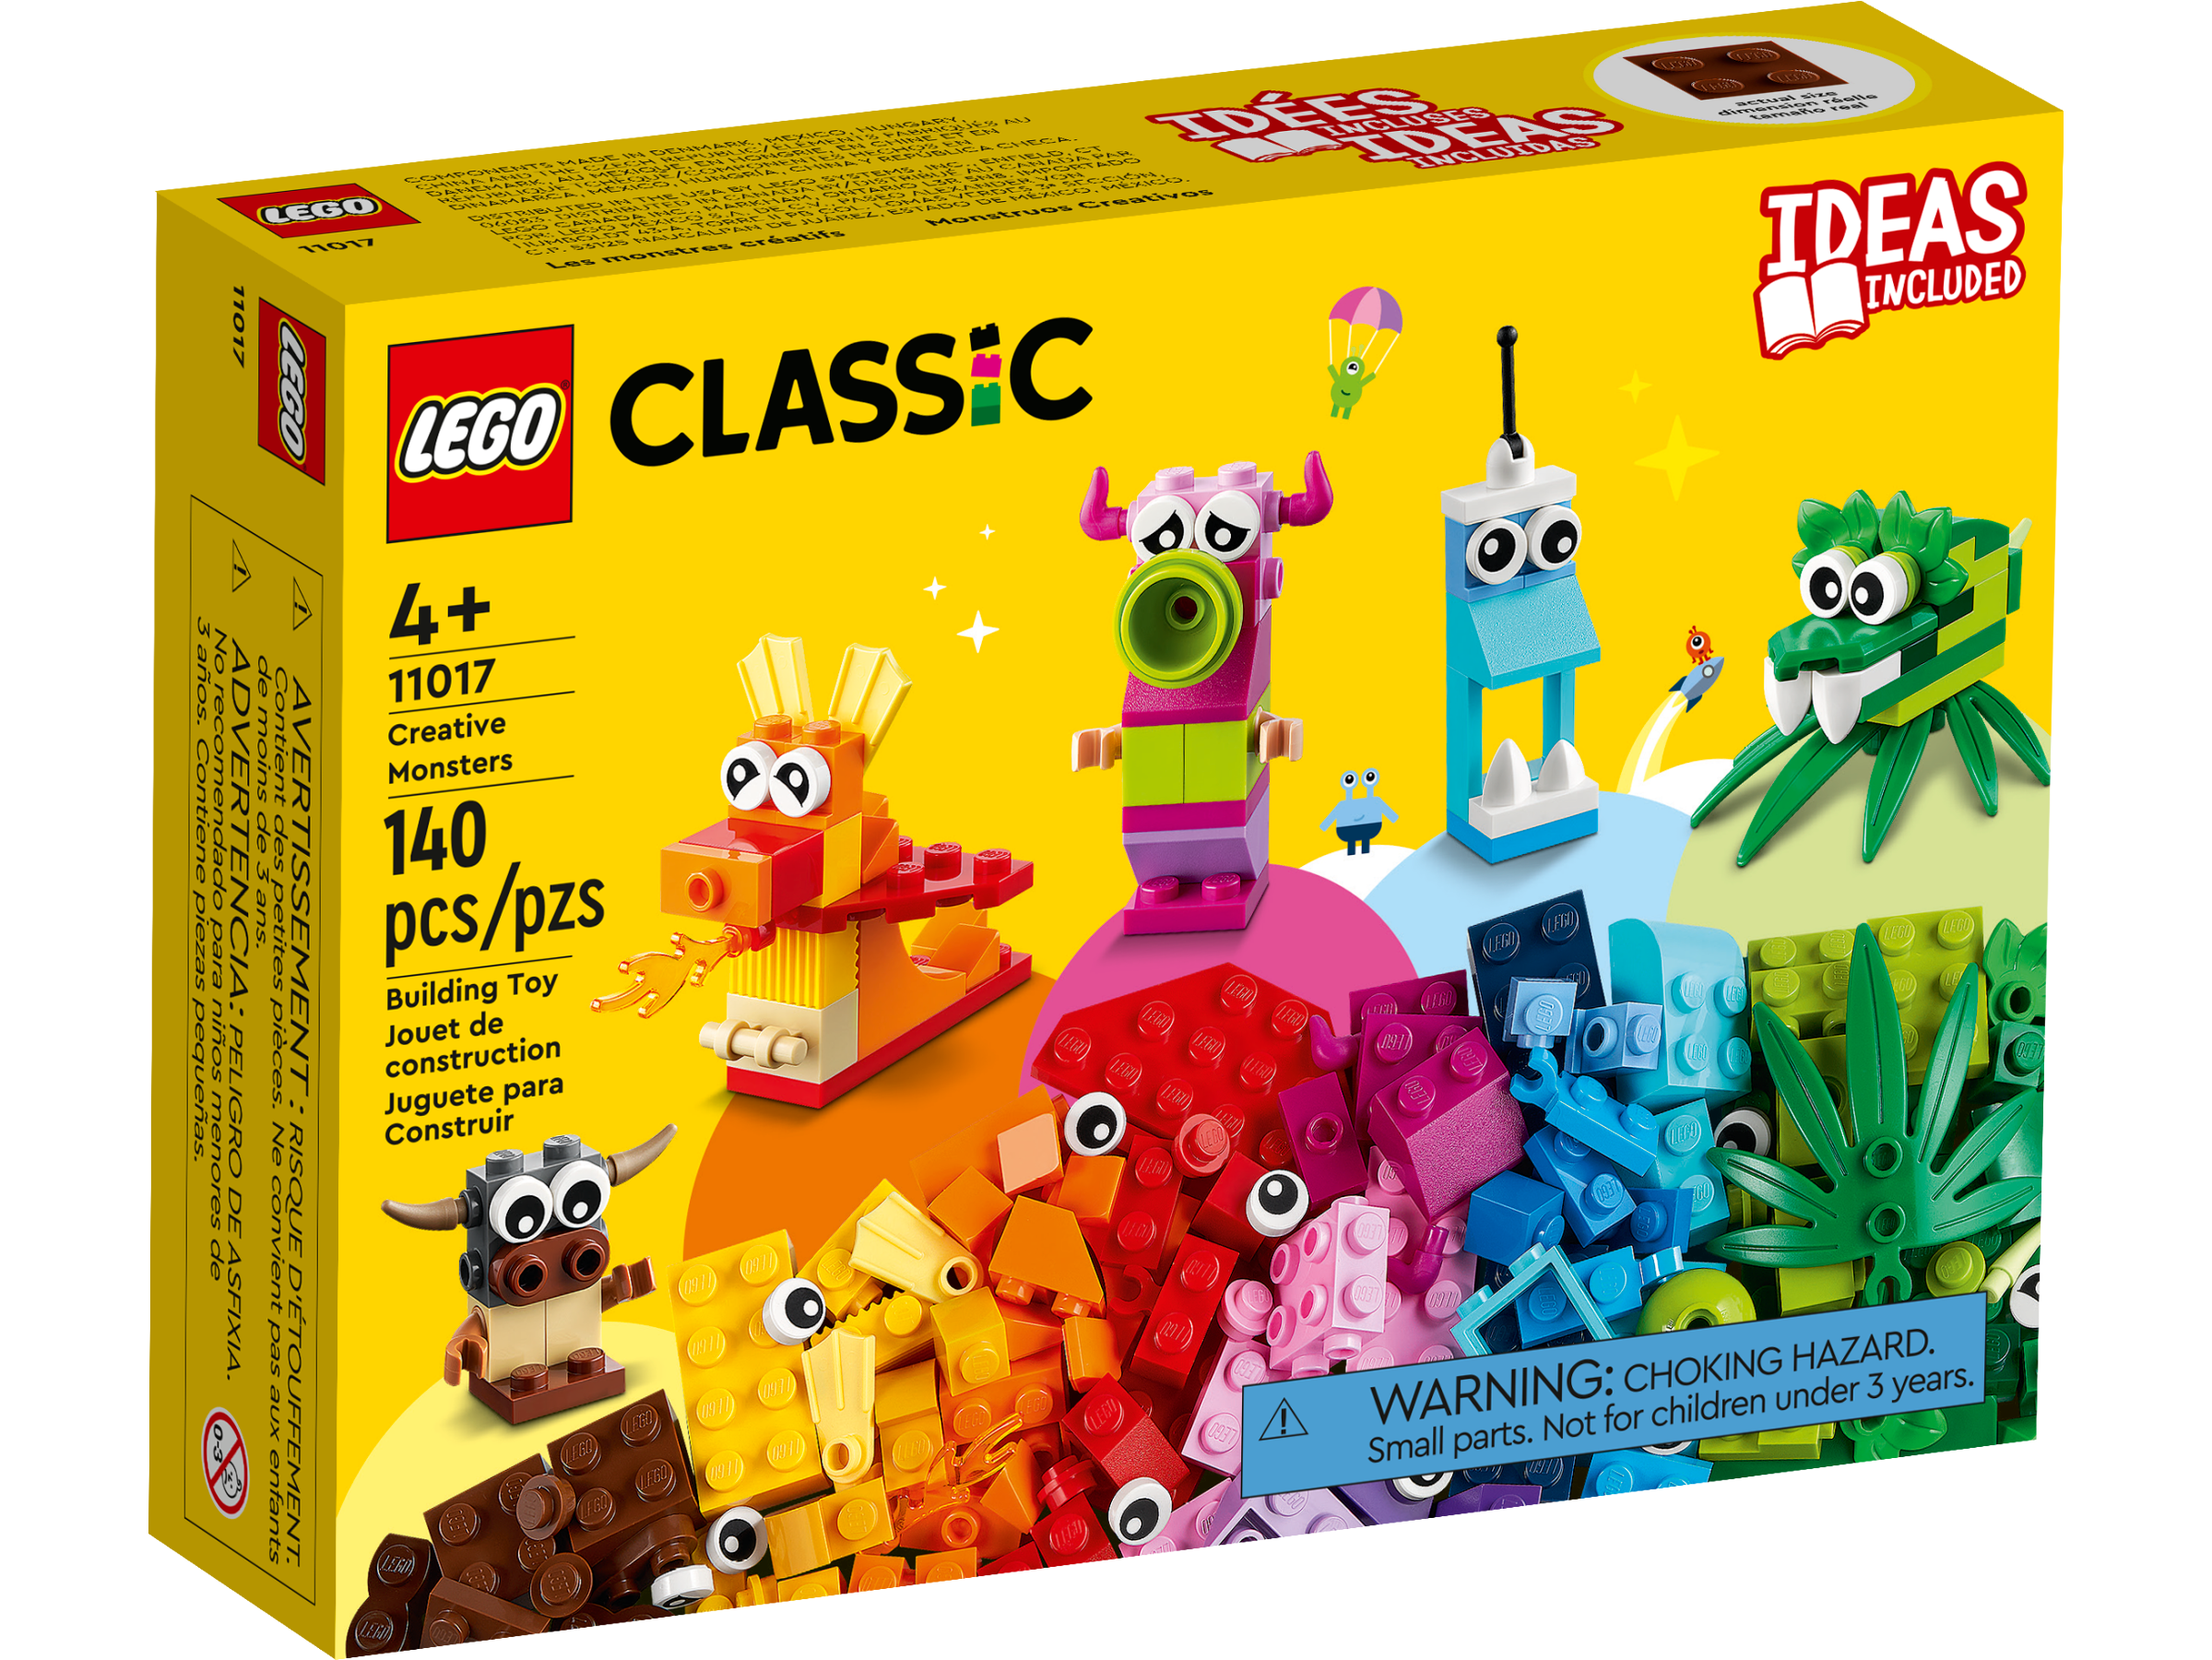  LEGO Classic Creative Monsters 11017 Building Toy Set